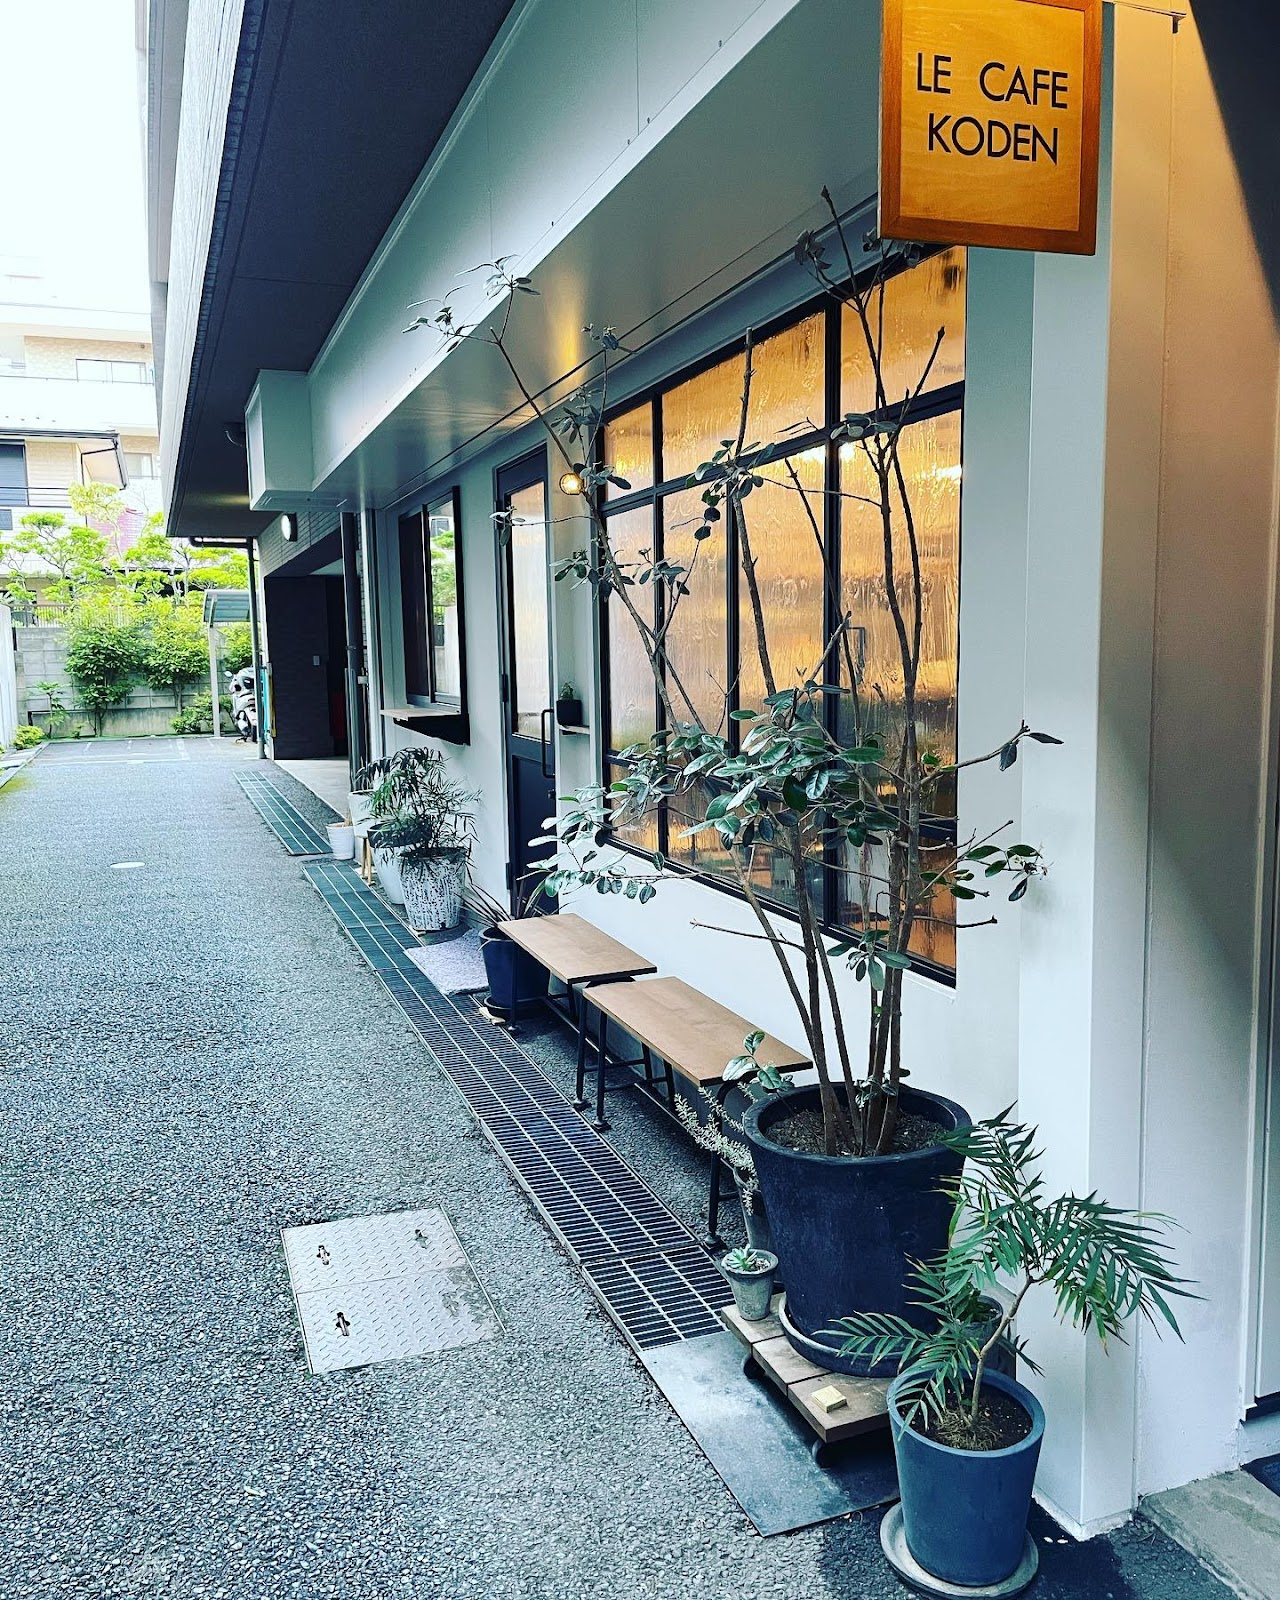 LE CAFE KODENの風景